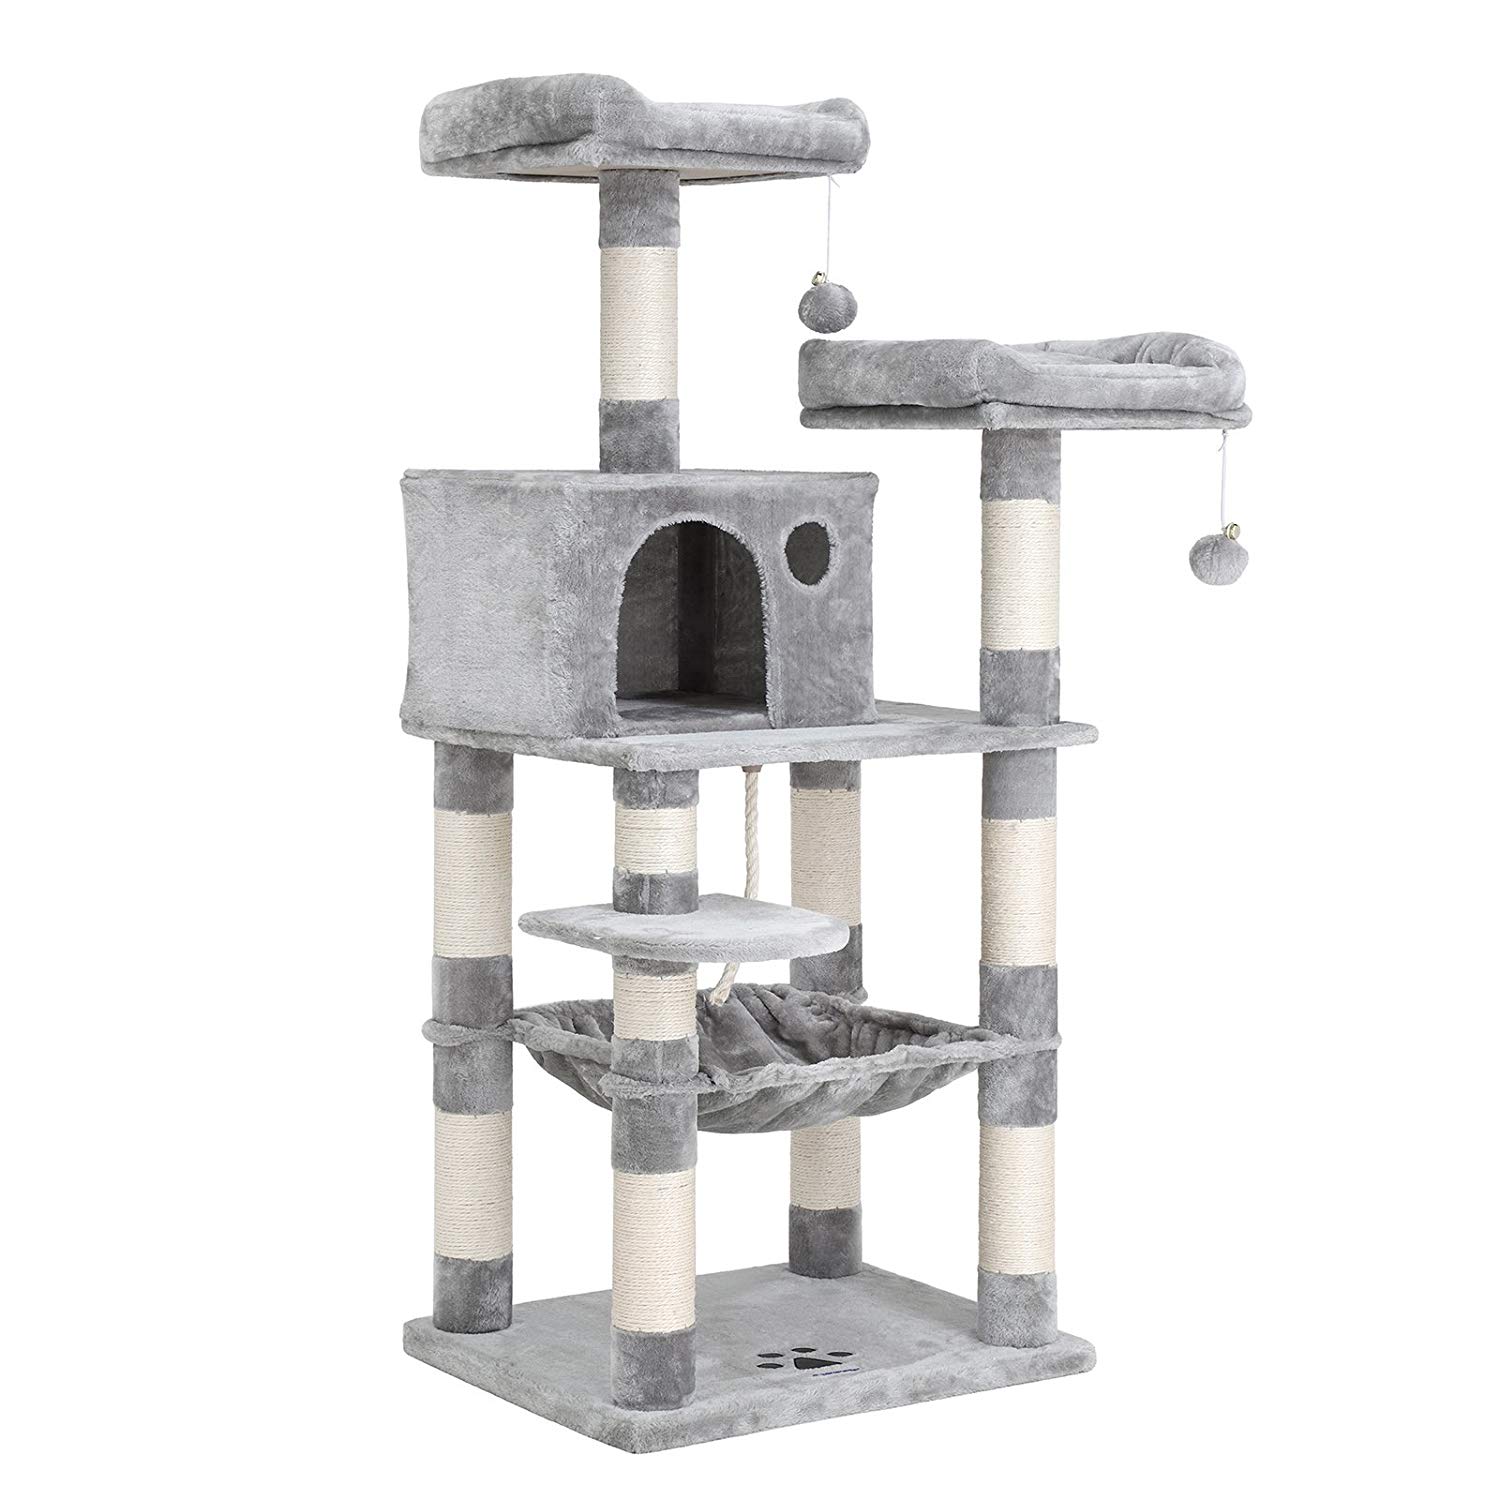 SONGMICS 58” Multi-Level Cat Tree with Sisal-Covered Scratching Posts